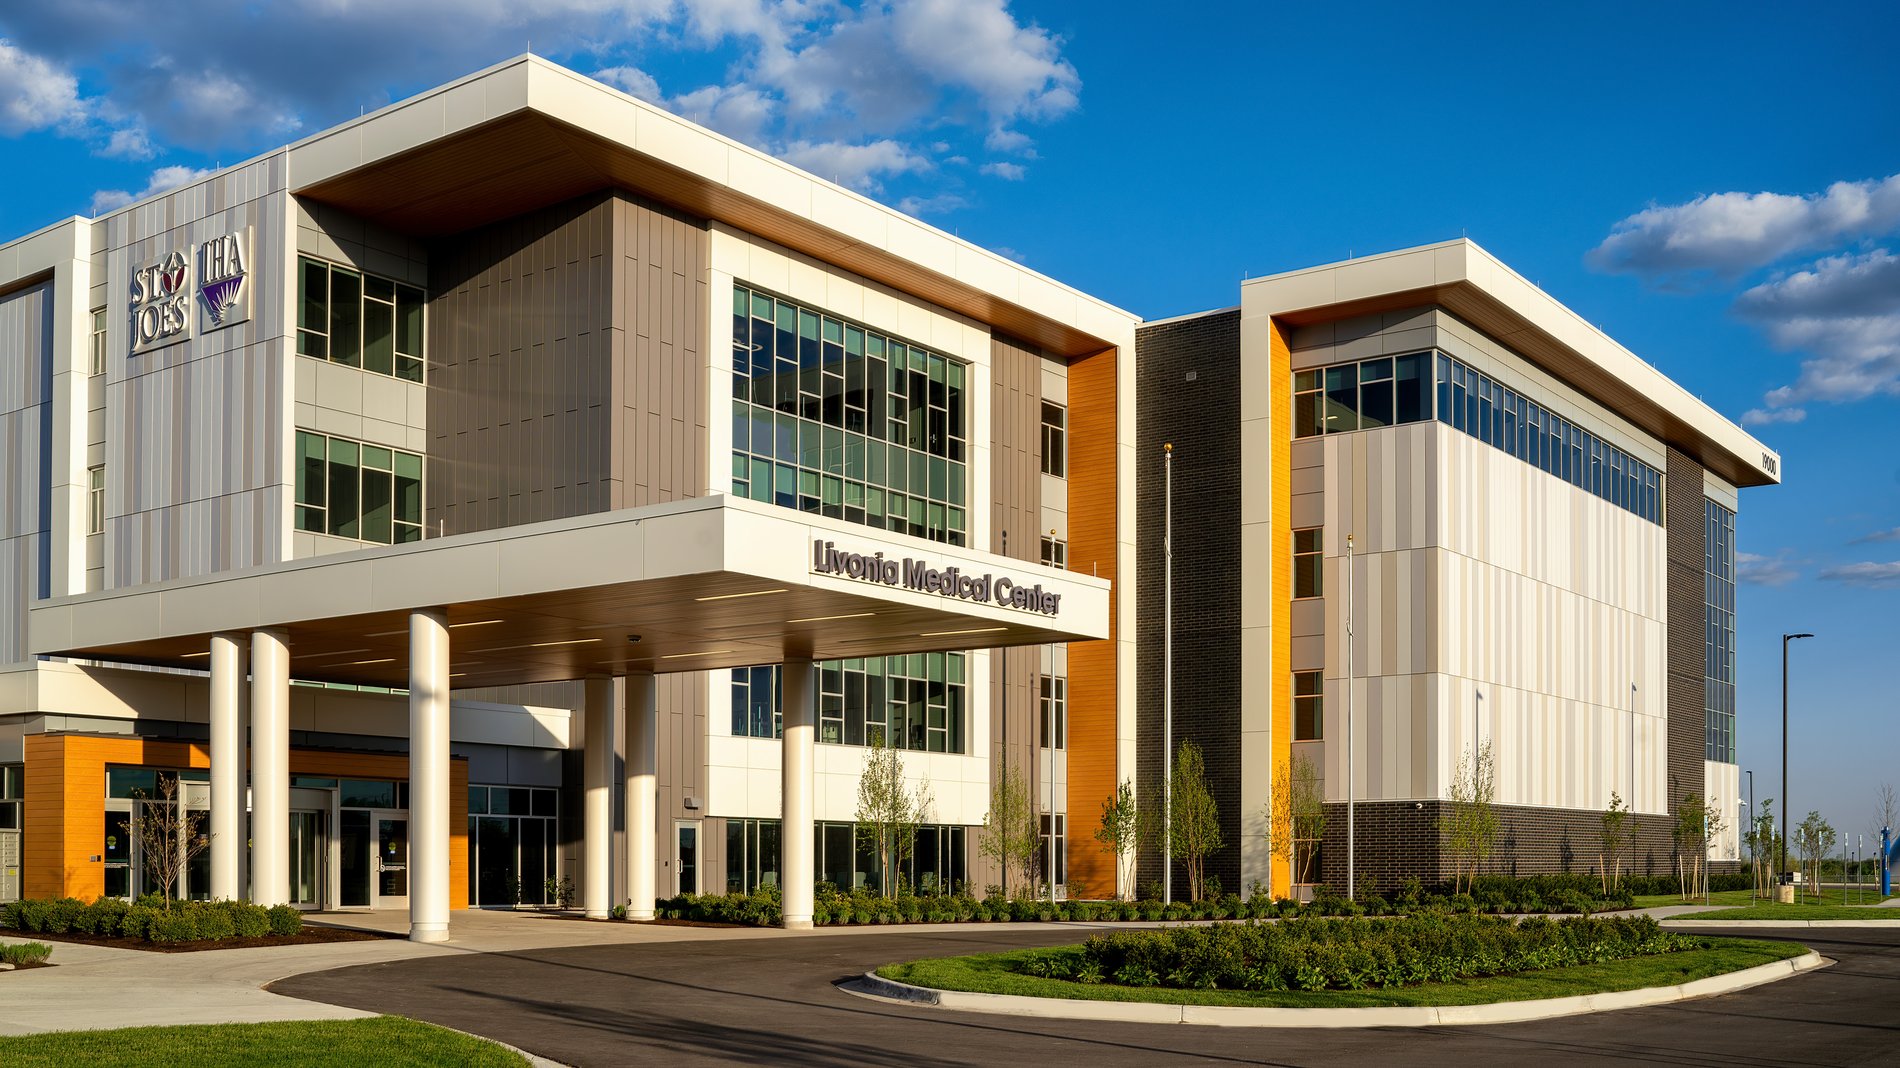 IHA Obstetrics & Gynecology Livonia is located in the Livonia Medical Center on the campus of Schoolcraft College.